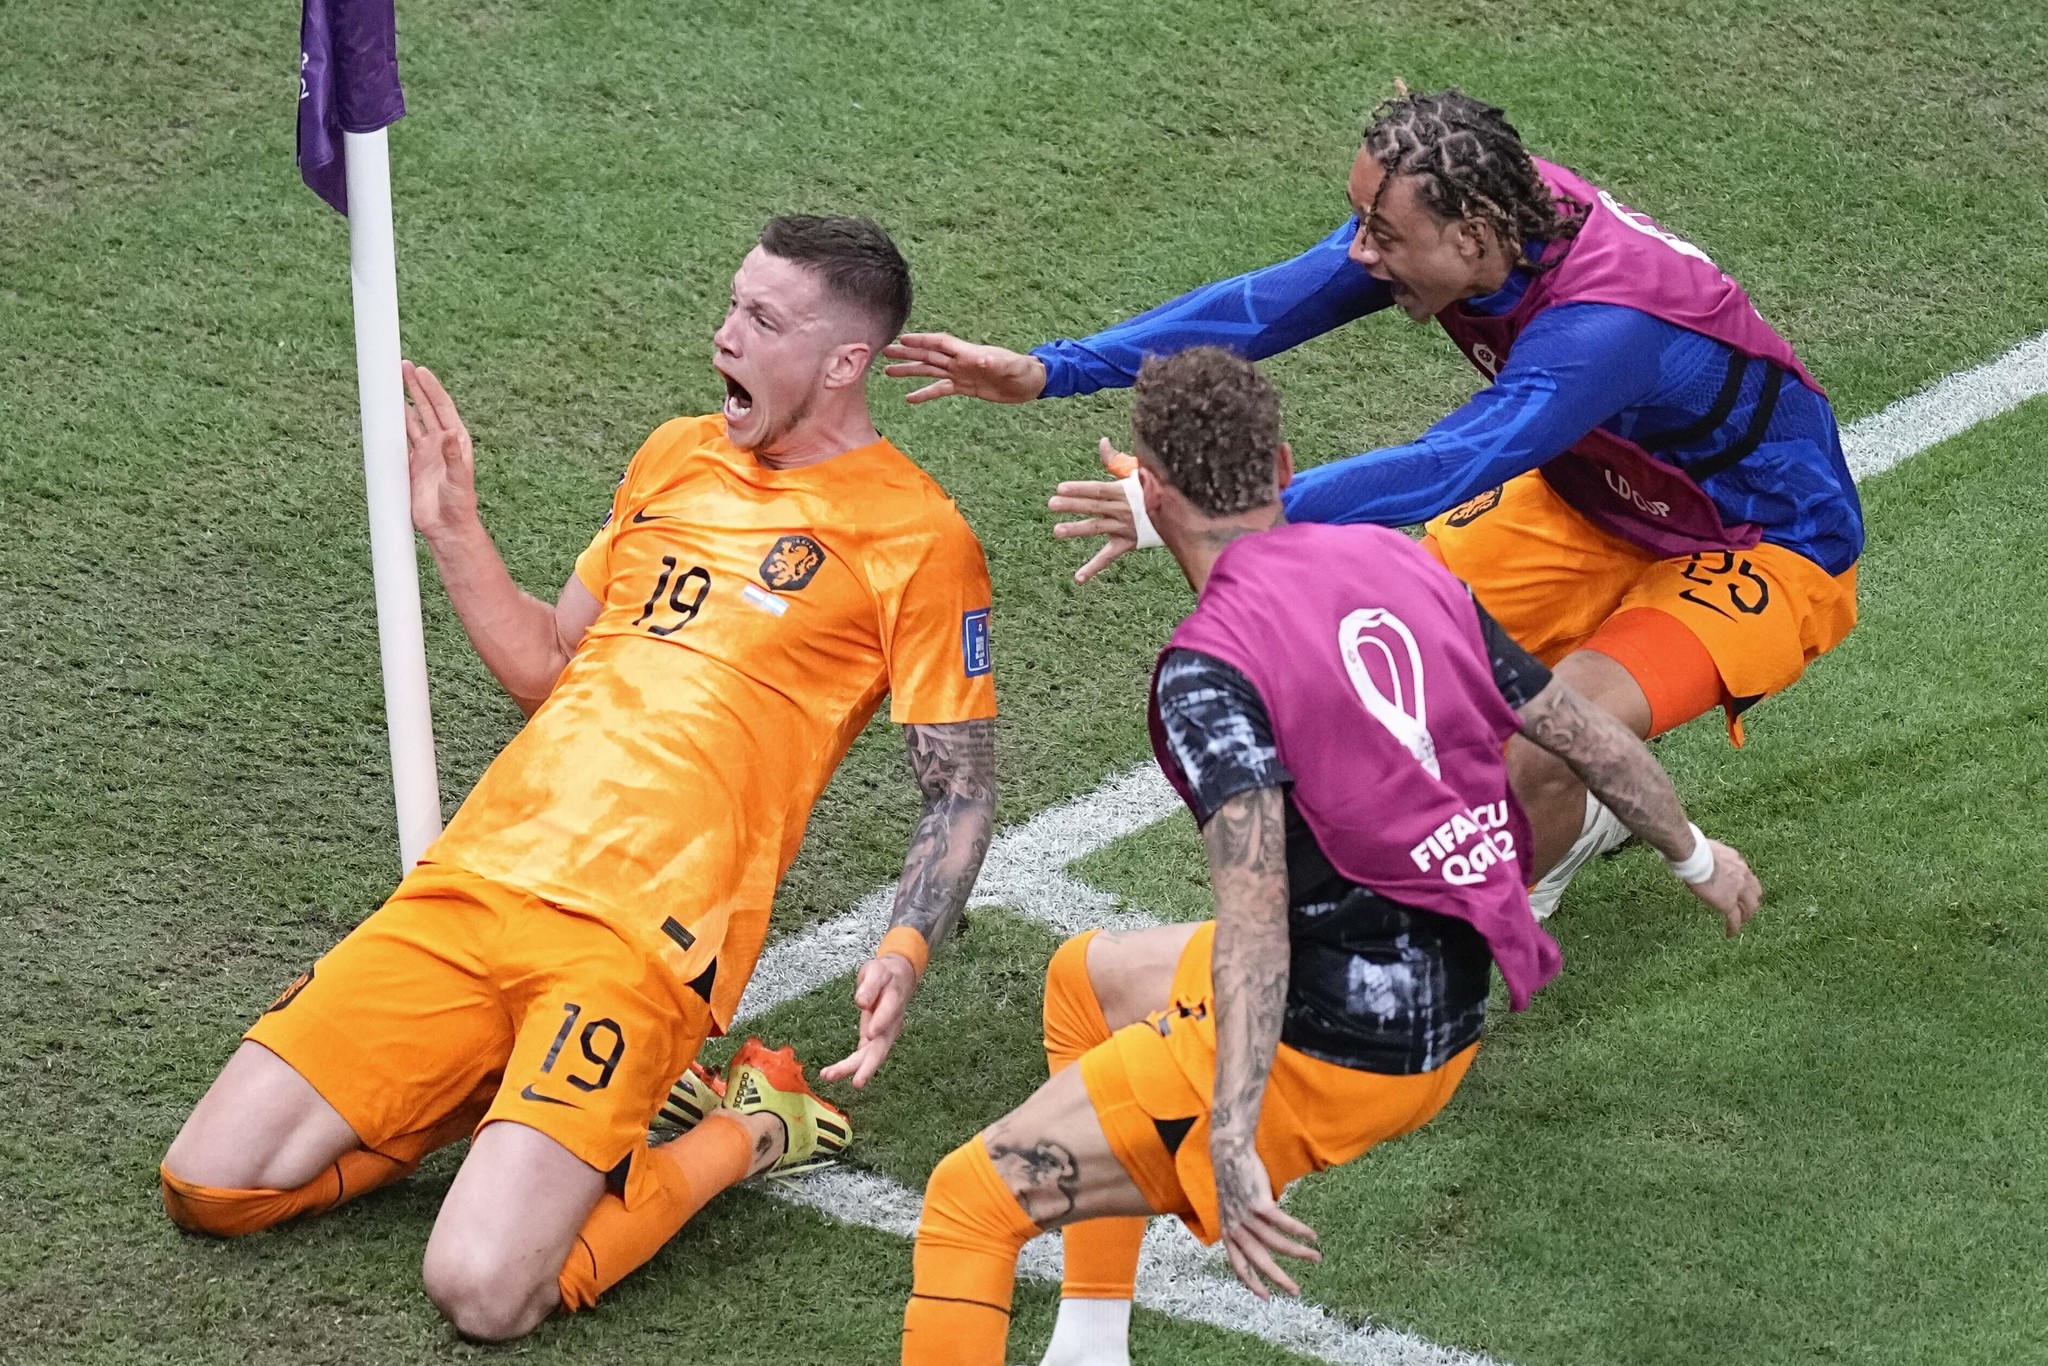 Wout Weghorst of the Netherlands, left, celebrates after scoring during the World Cup quarterfinal soccer match between the Netherlands and  lt;HIT gt;Argentina lt;/HIT gt;, at the Lusail Stadium in Lusail, Qatar, Friday, Dec. 9, 2022. (AP Photo/Ariel Schalit)